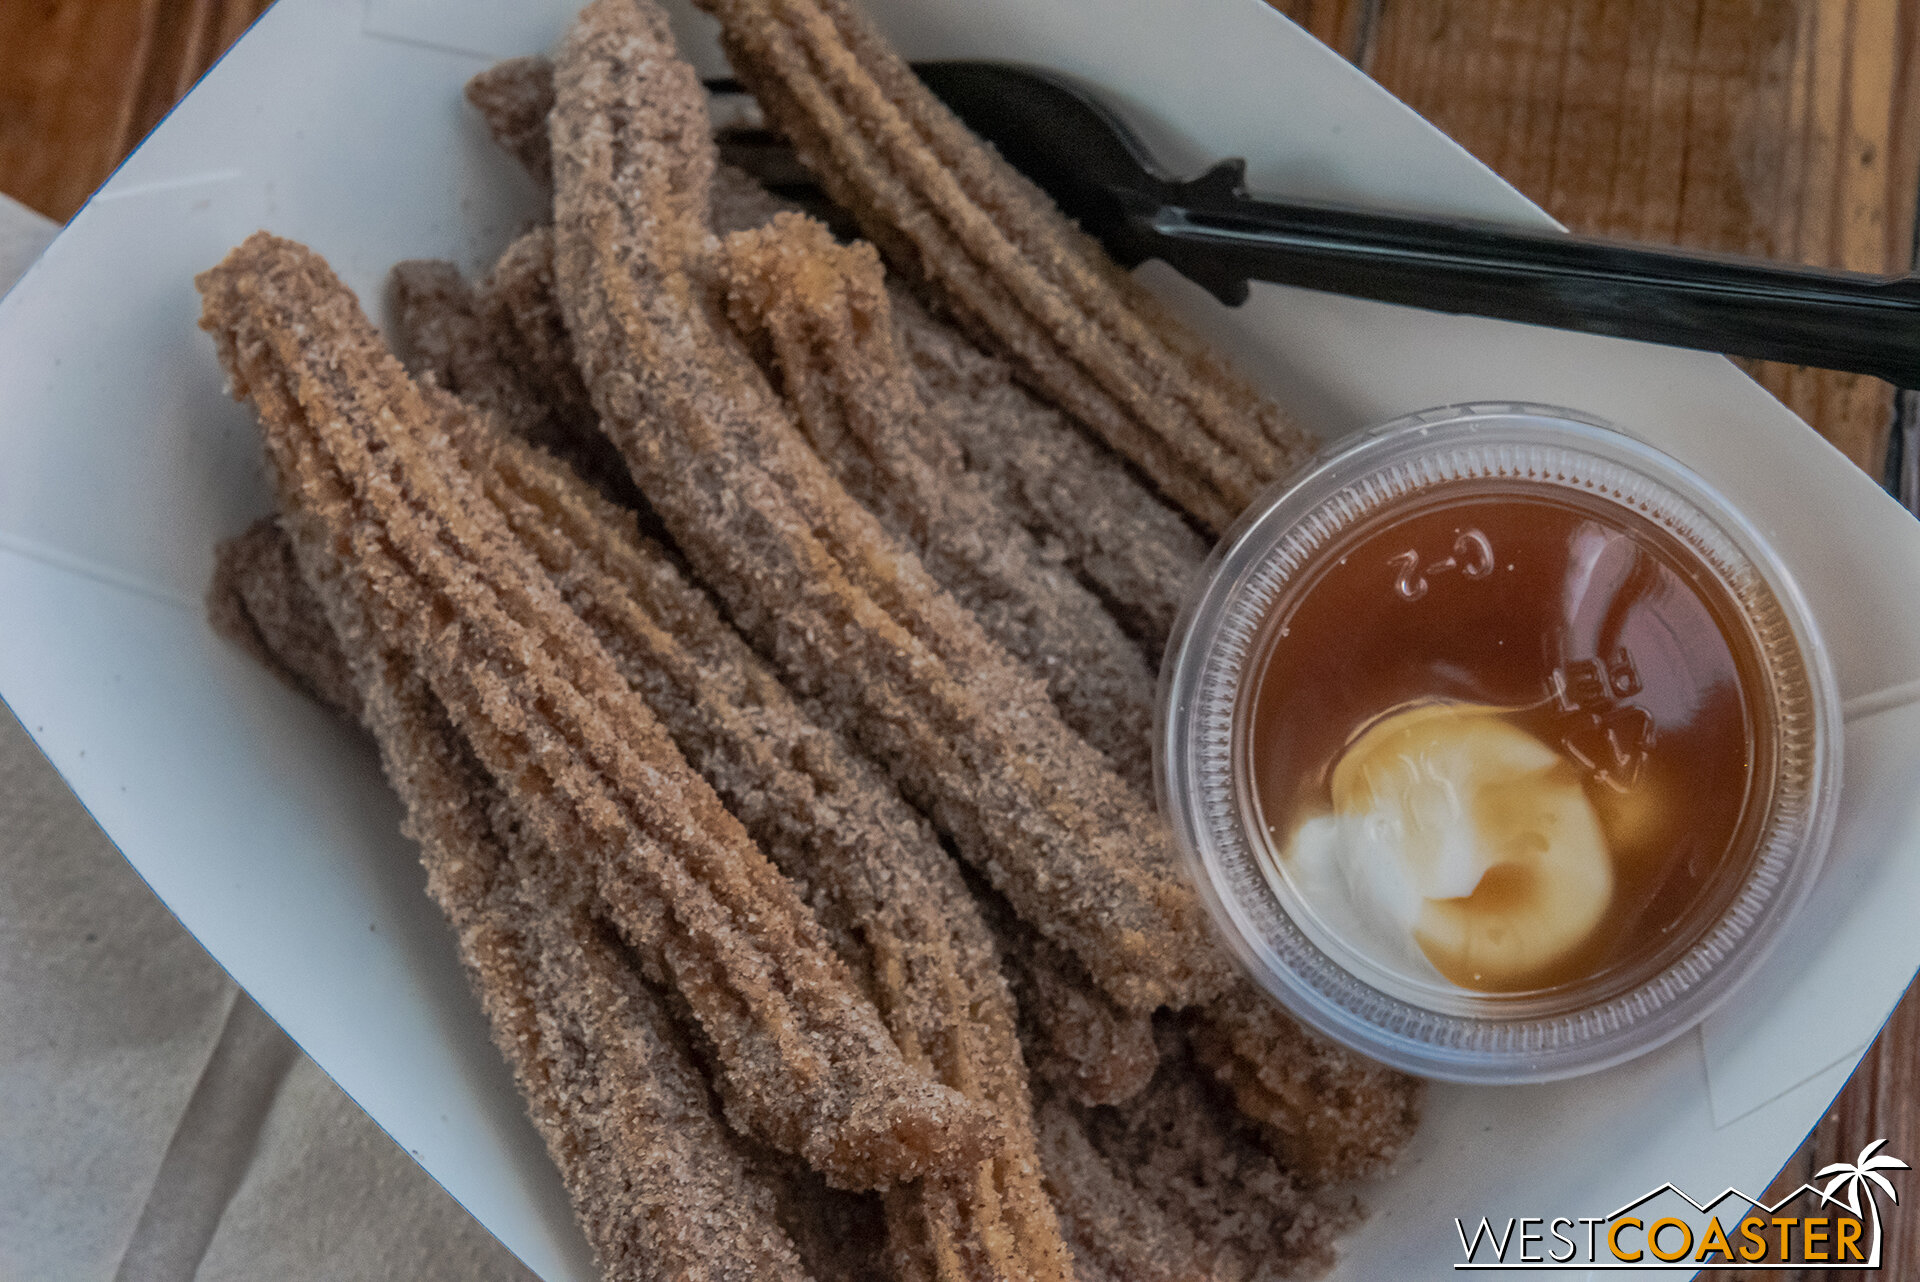  French Toast Churro Sticks with Buttercream Caramel Dipping Sauce, from Gourmet Churro Factory.  